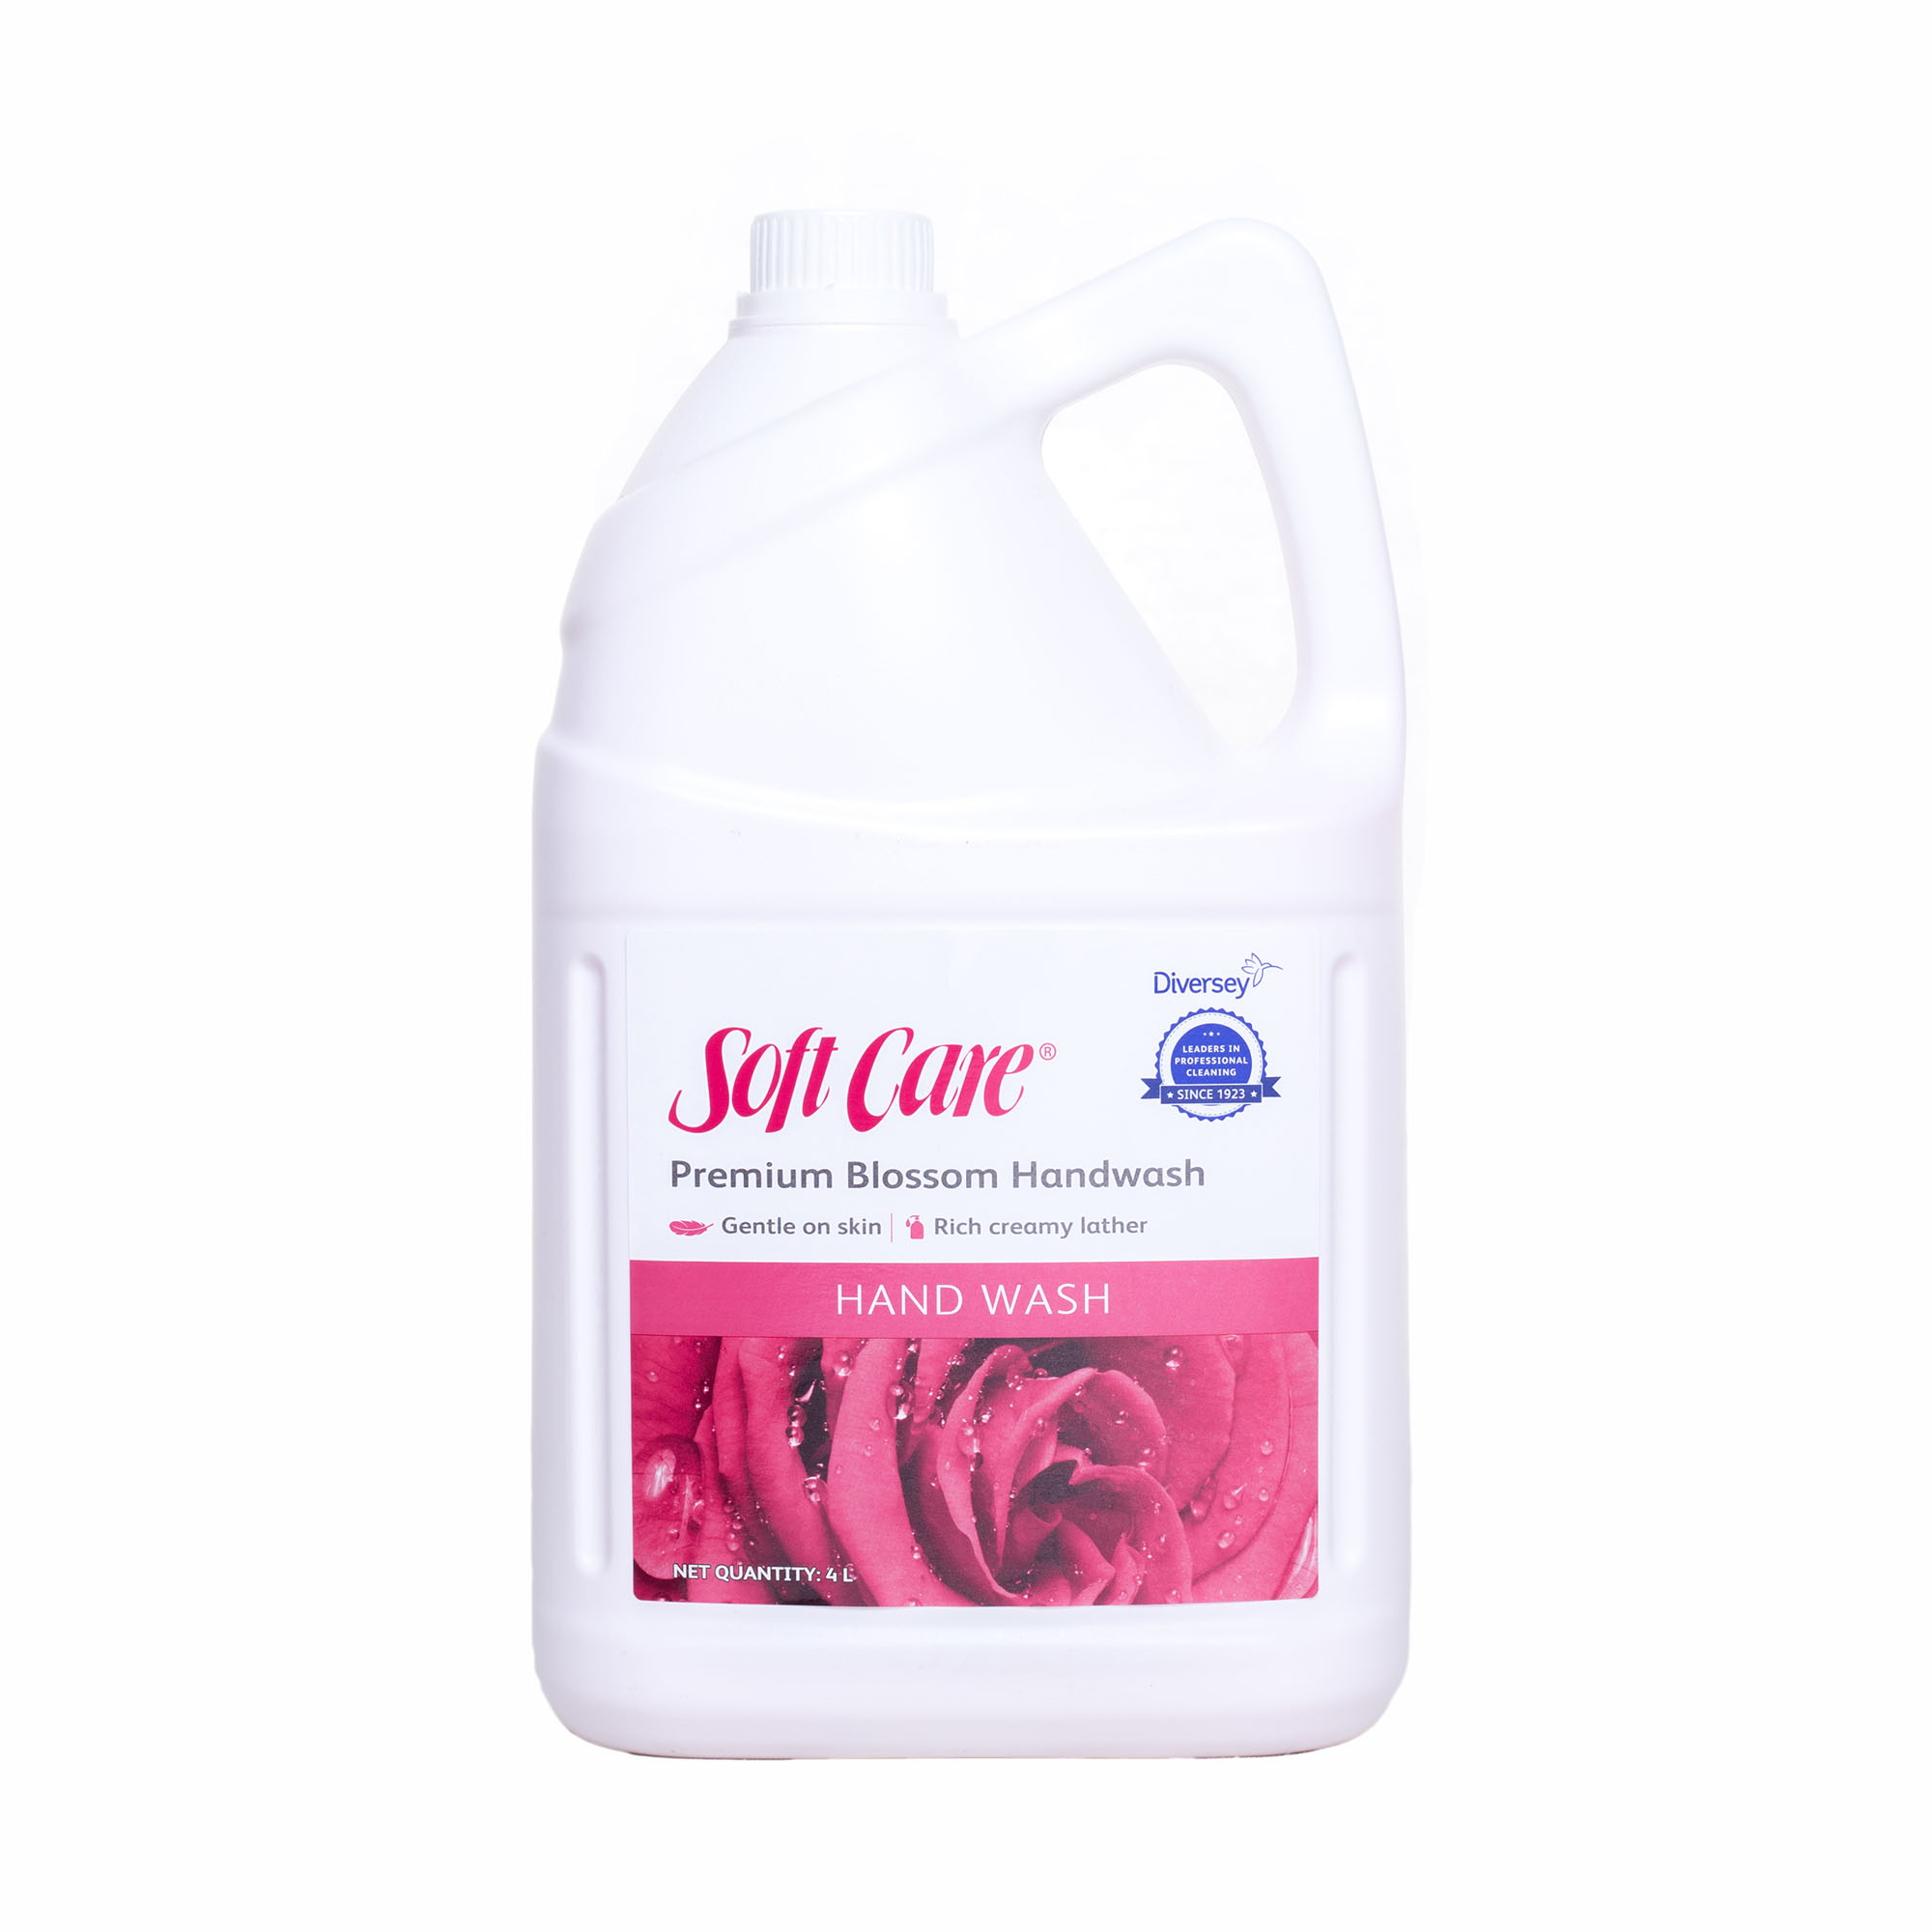 Softcare%20Blossom%20Hand%20wash%20%28Front%292000x2000.jpg